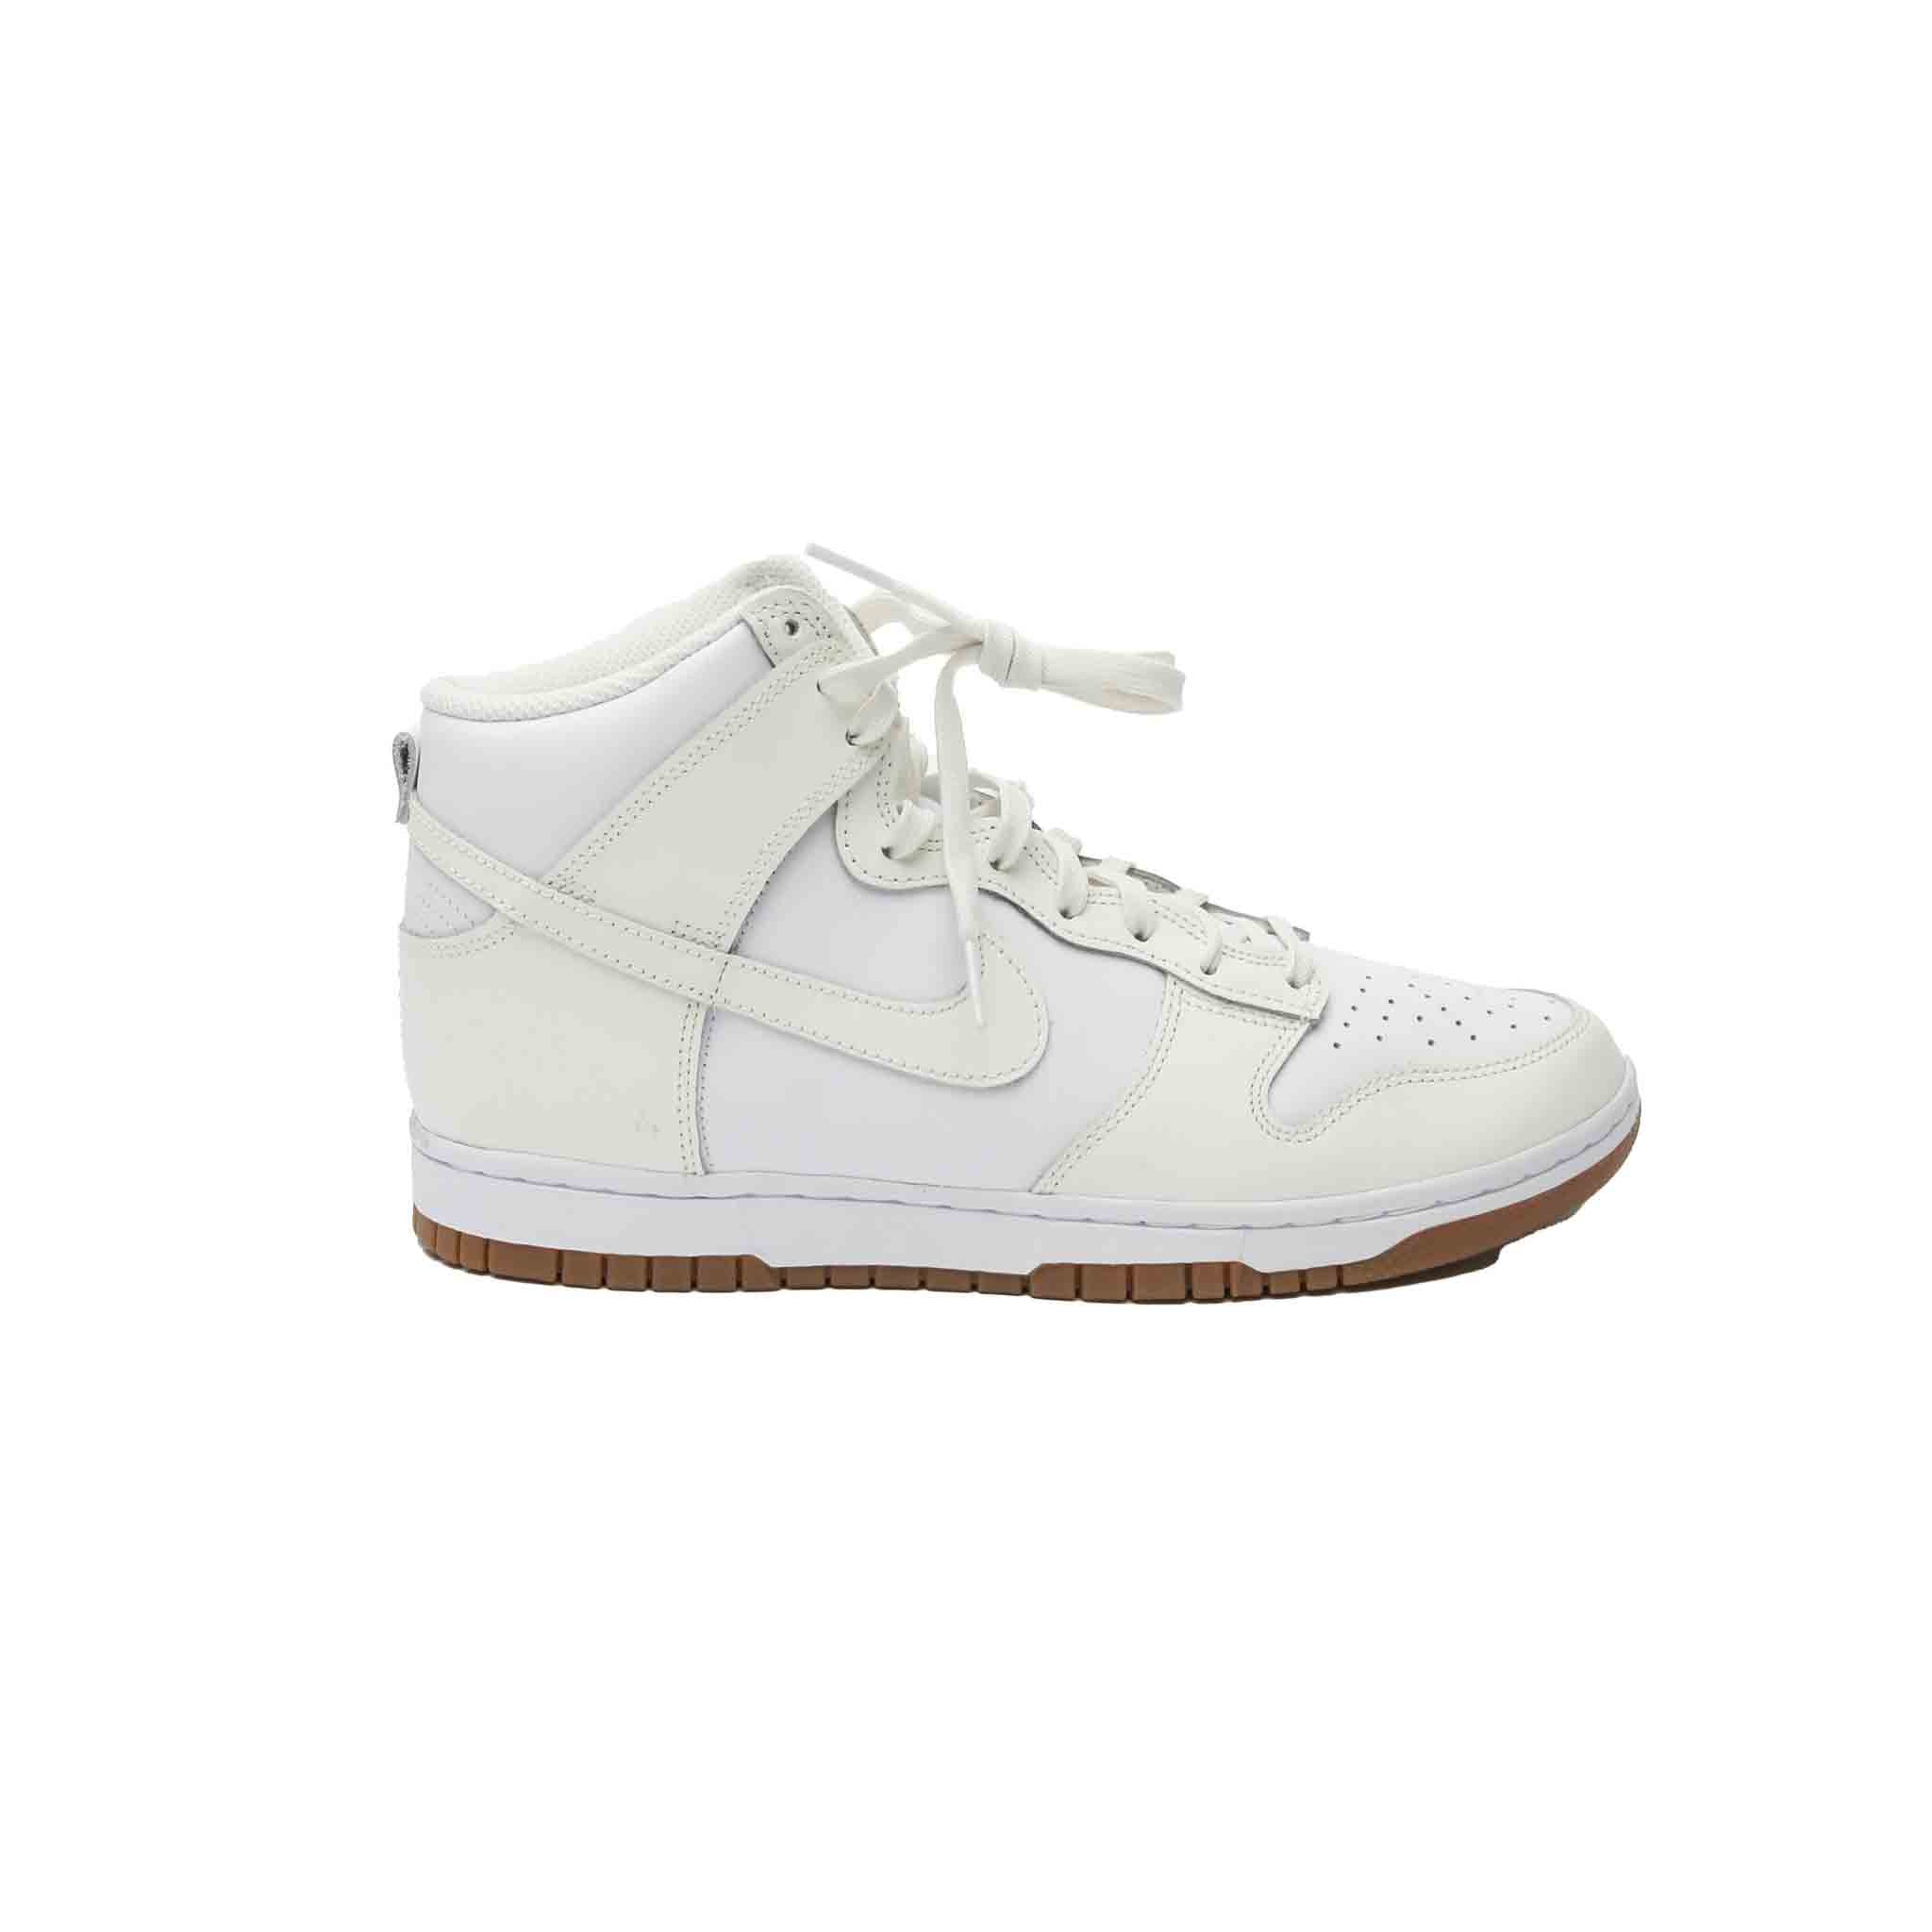 The Nike Dunk High is a stylish, high-performance sneaker that is perfect for casual wear. The white leather uppers and gum sole give this shoe a sleek, sophisticated look, while the rubber sole provides traction and durability. Whether paired with jeans or leggings, this sneaker is sure to become a go-to favourite for any woman.